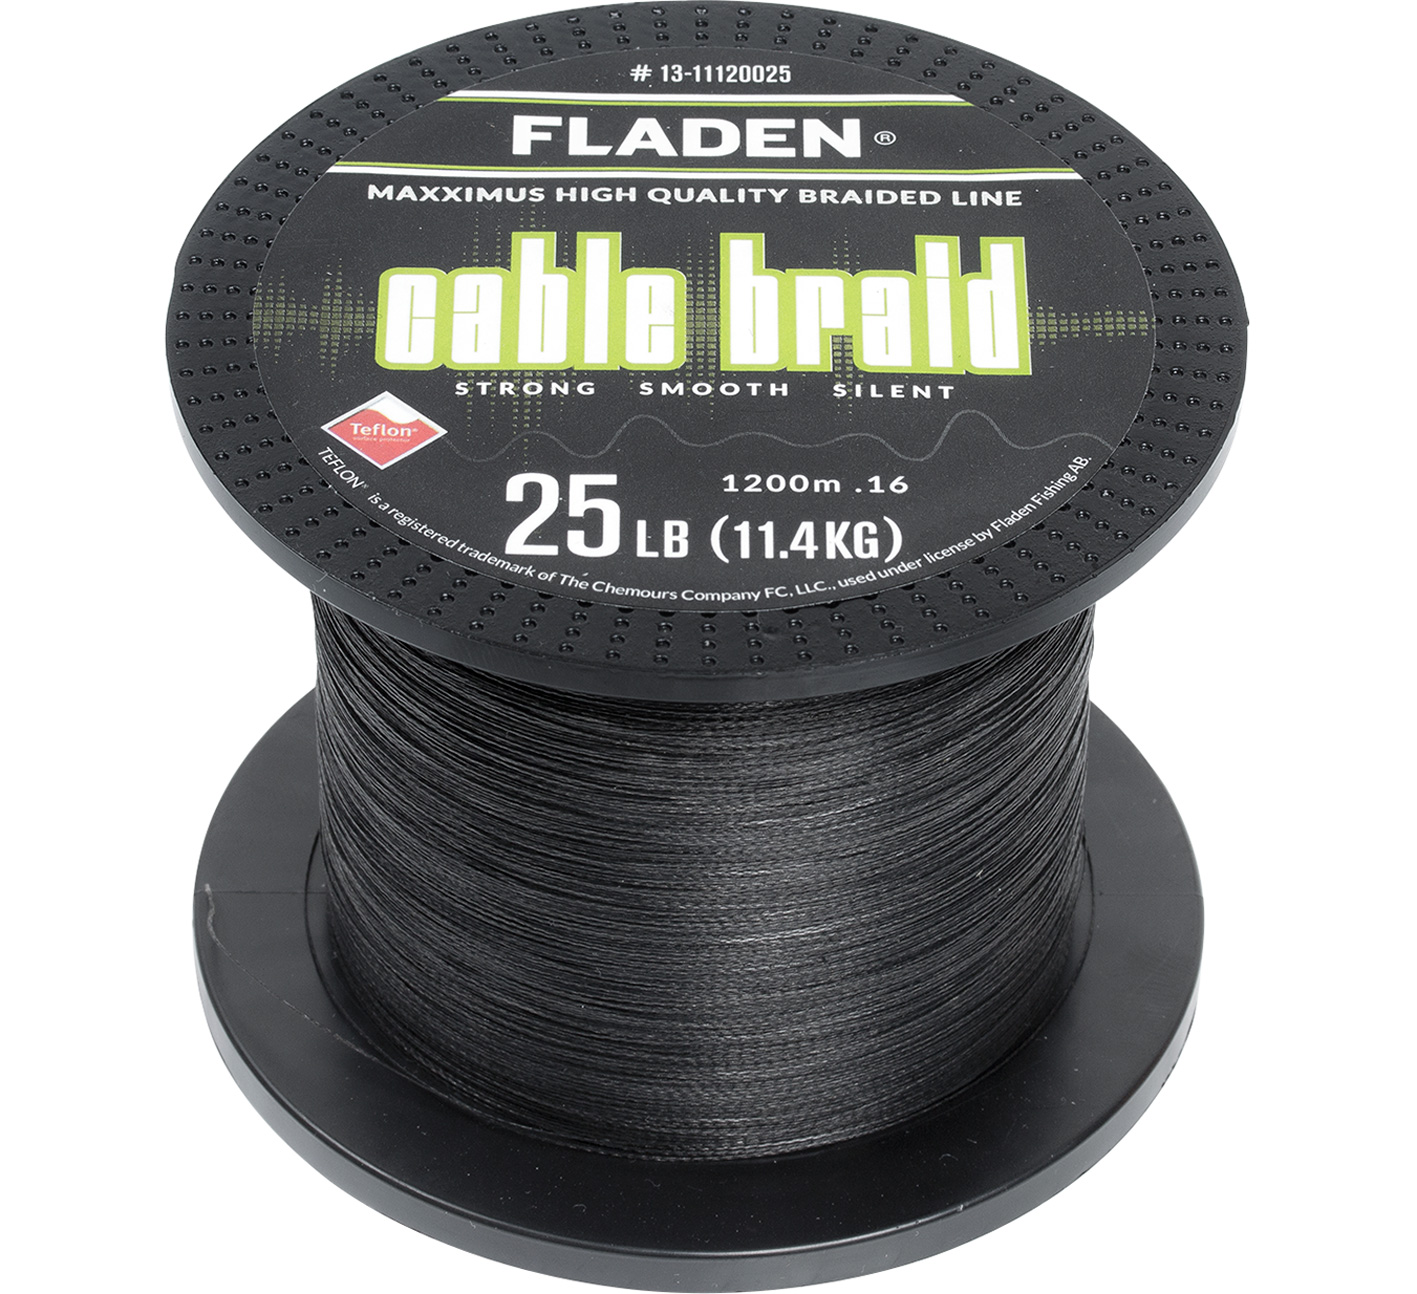 FLADEN 150m FISHING BRAID 25lb RED 0.16 Teflon Coated Braided line for Reel 